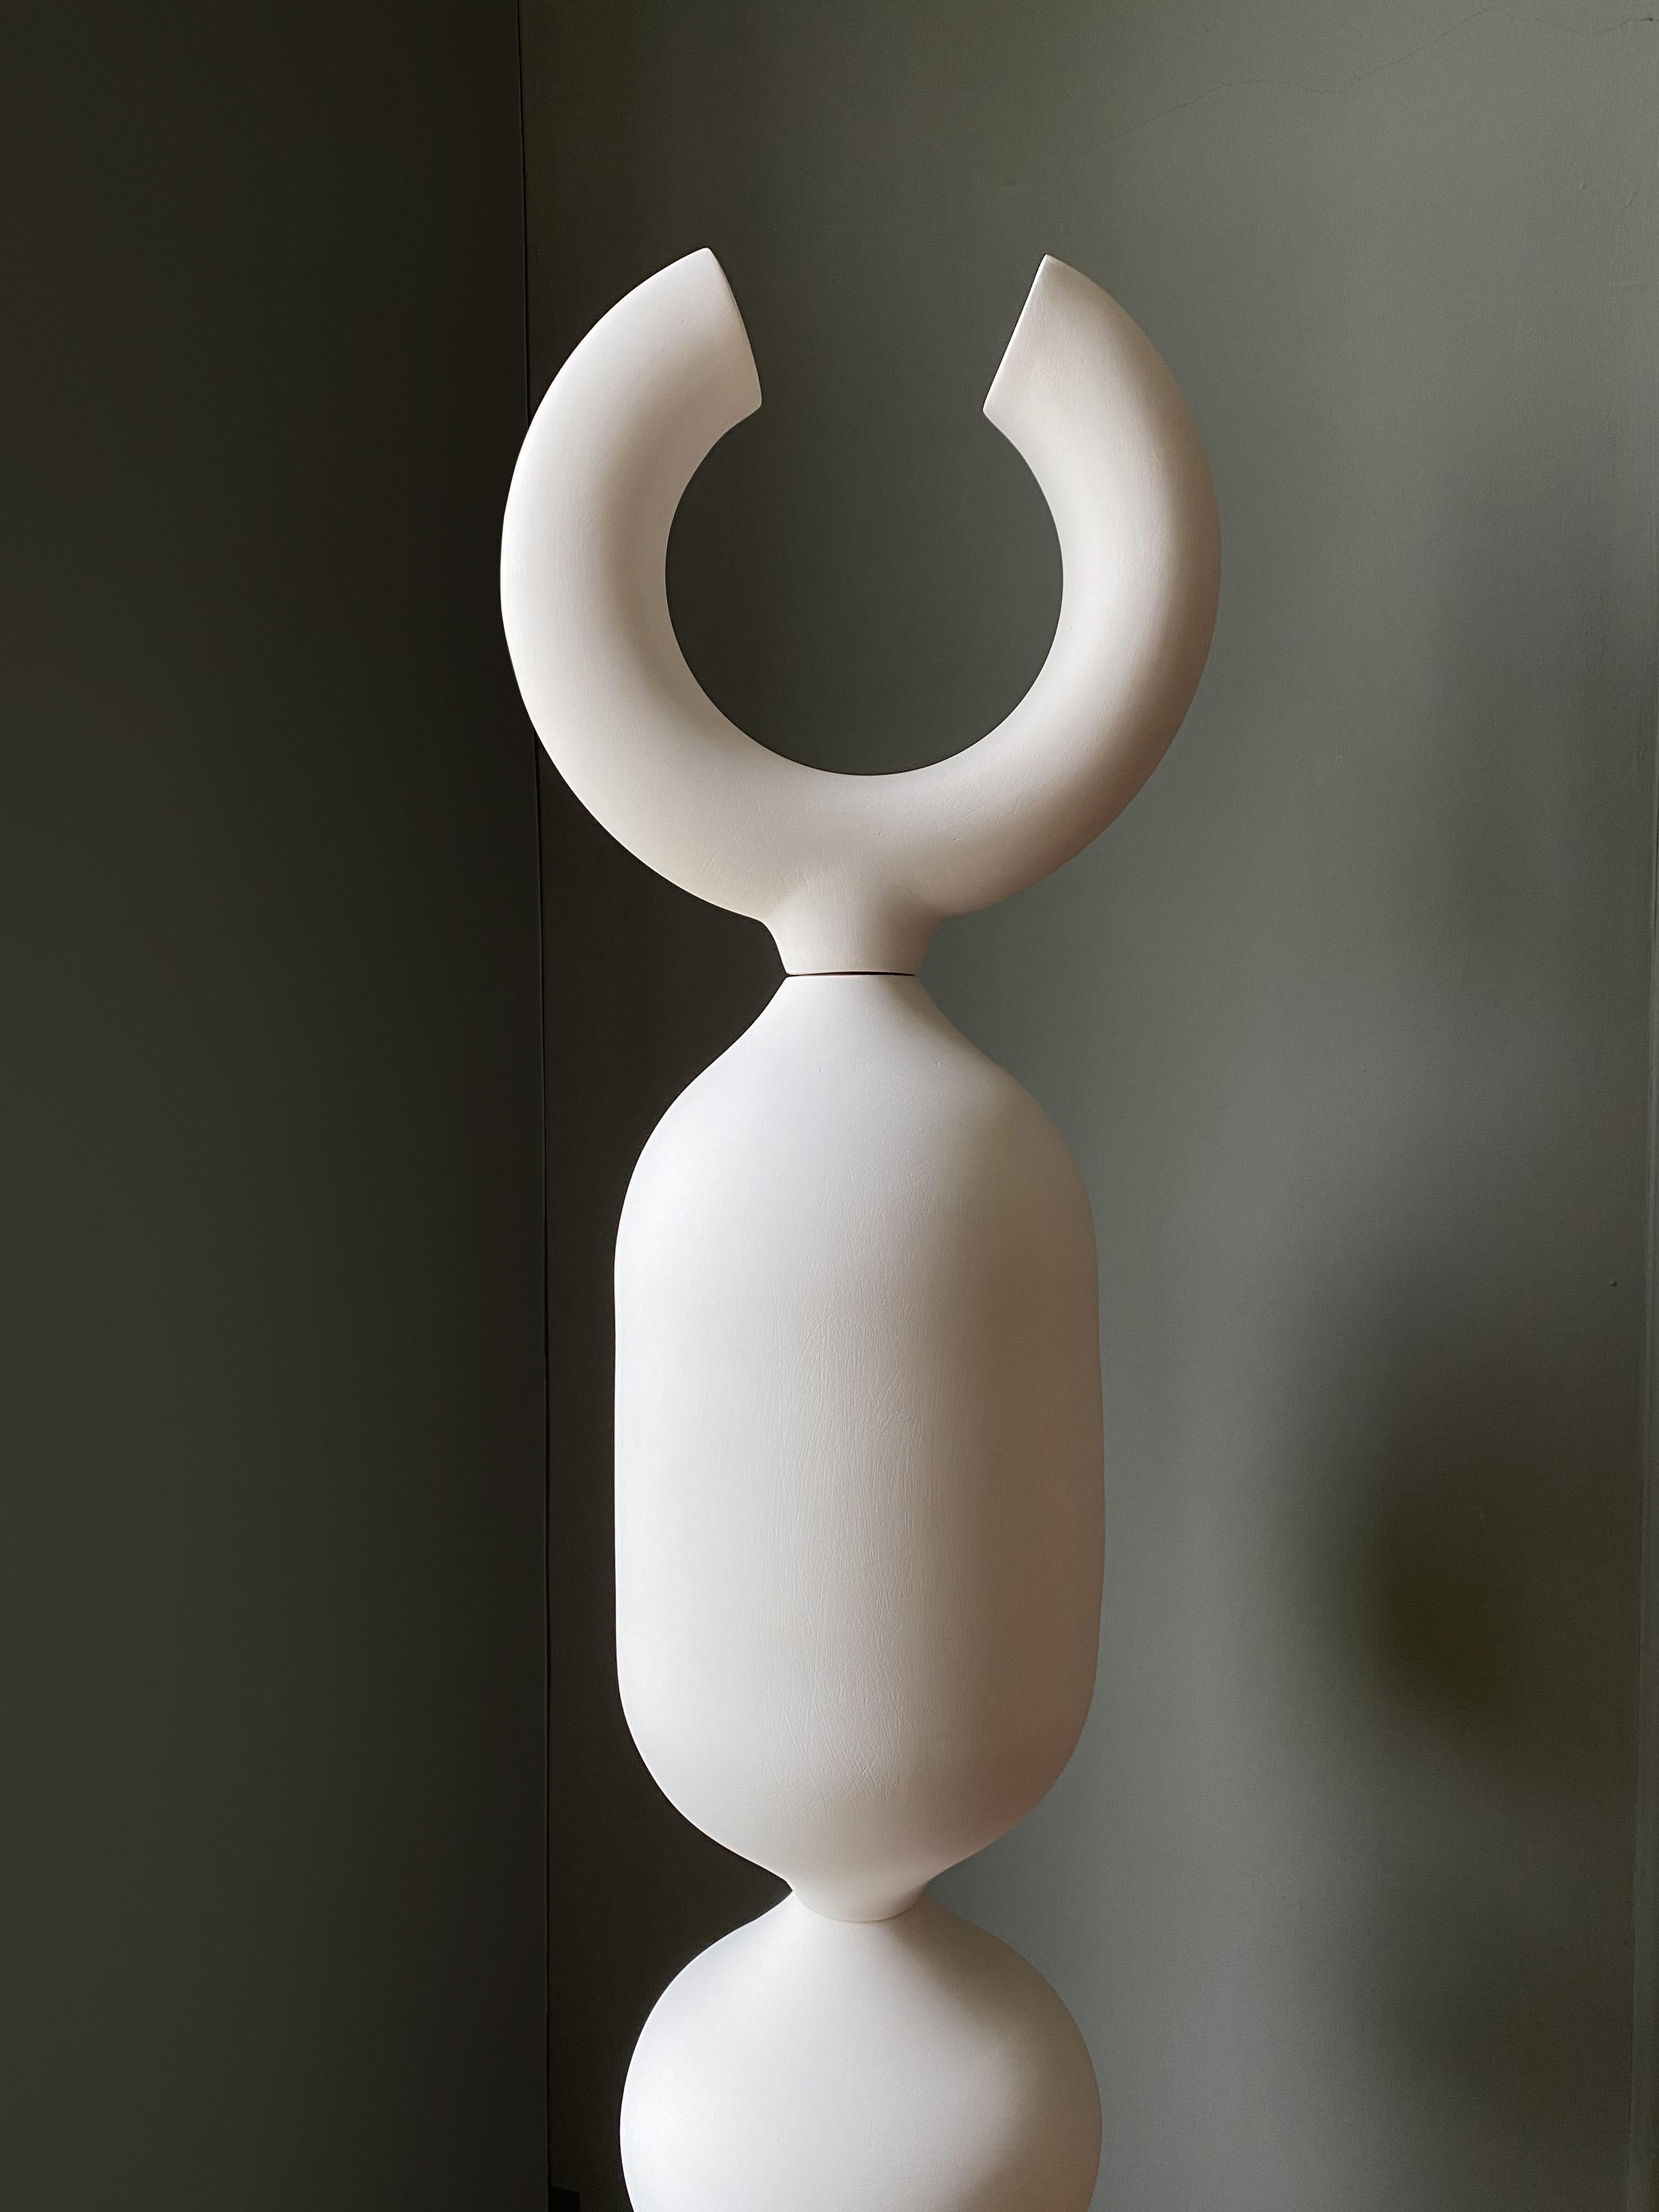 These totemic sculptures are fully handmade, done in a traditional wheeling ceramic technics.
Their pure lines and original clay texture; will catch the light, to give the eye a very soft experience Their generous hight and elegant proportions will